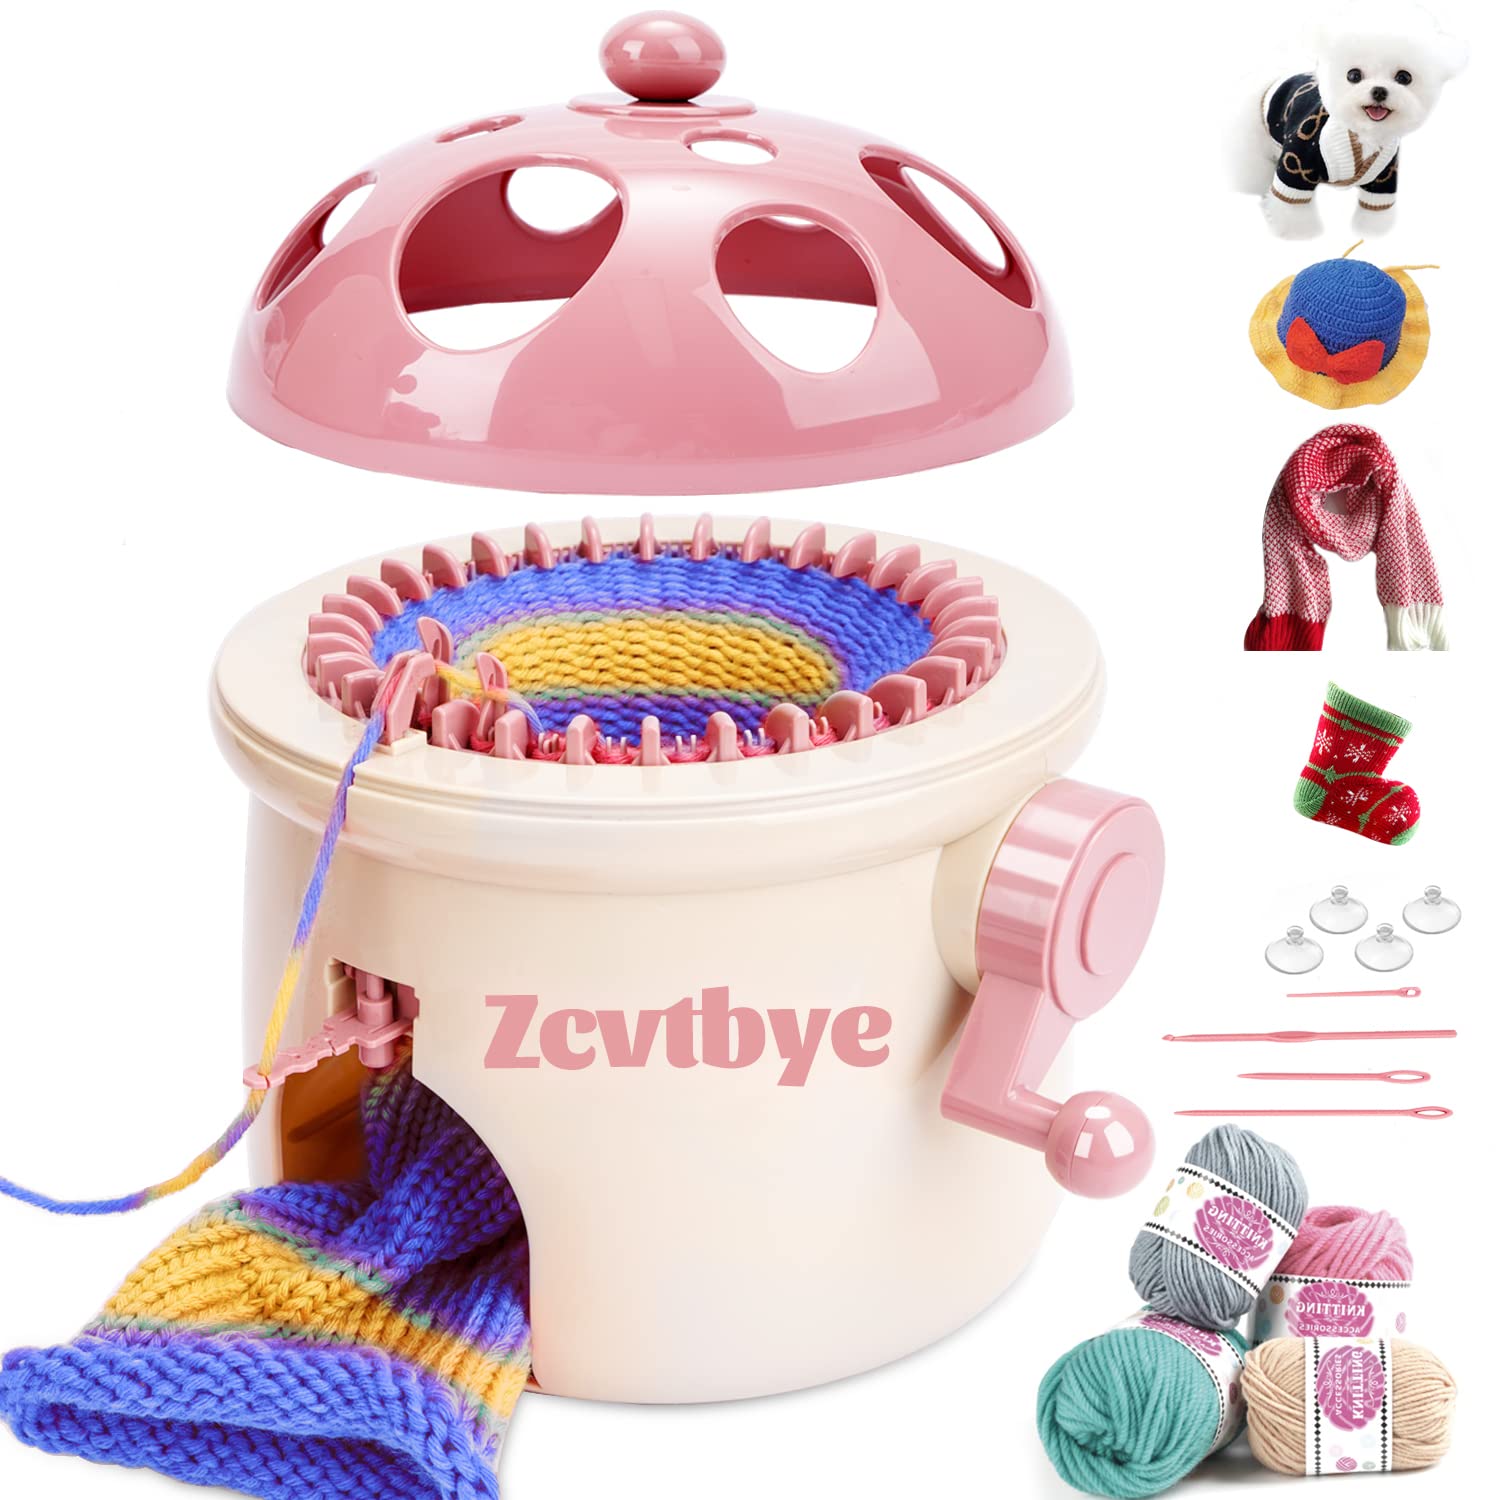  knitting machines/knitting machine 22 needles/smart loom- knitting loom DIY hand knitting machine-suitable for beginners and knitting  enthusiasts/22 pin knitting machine Mother's Day birthday gifts(22)